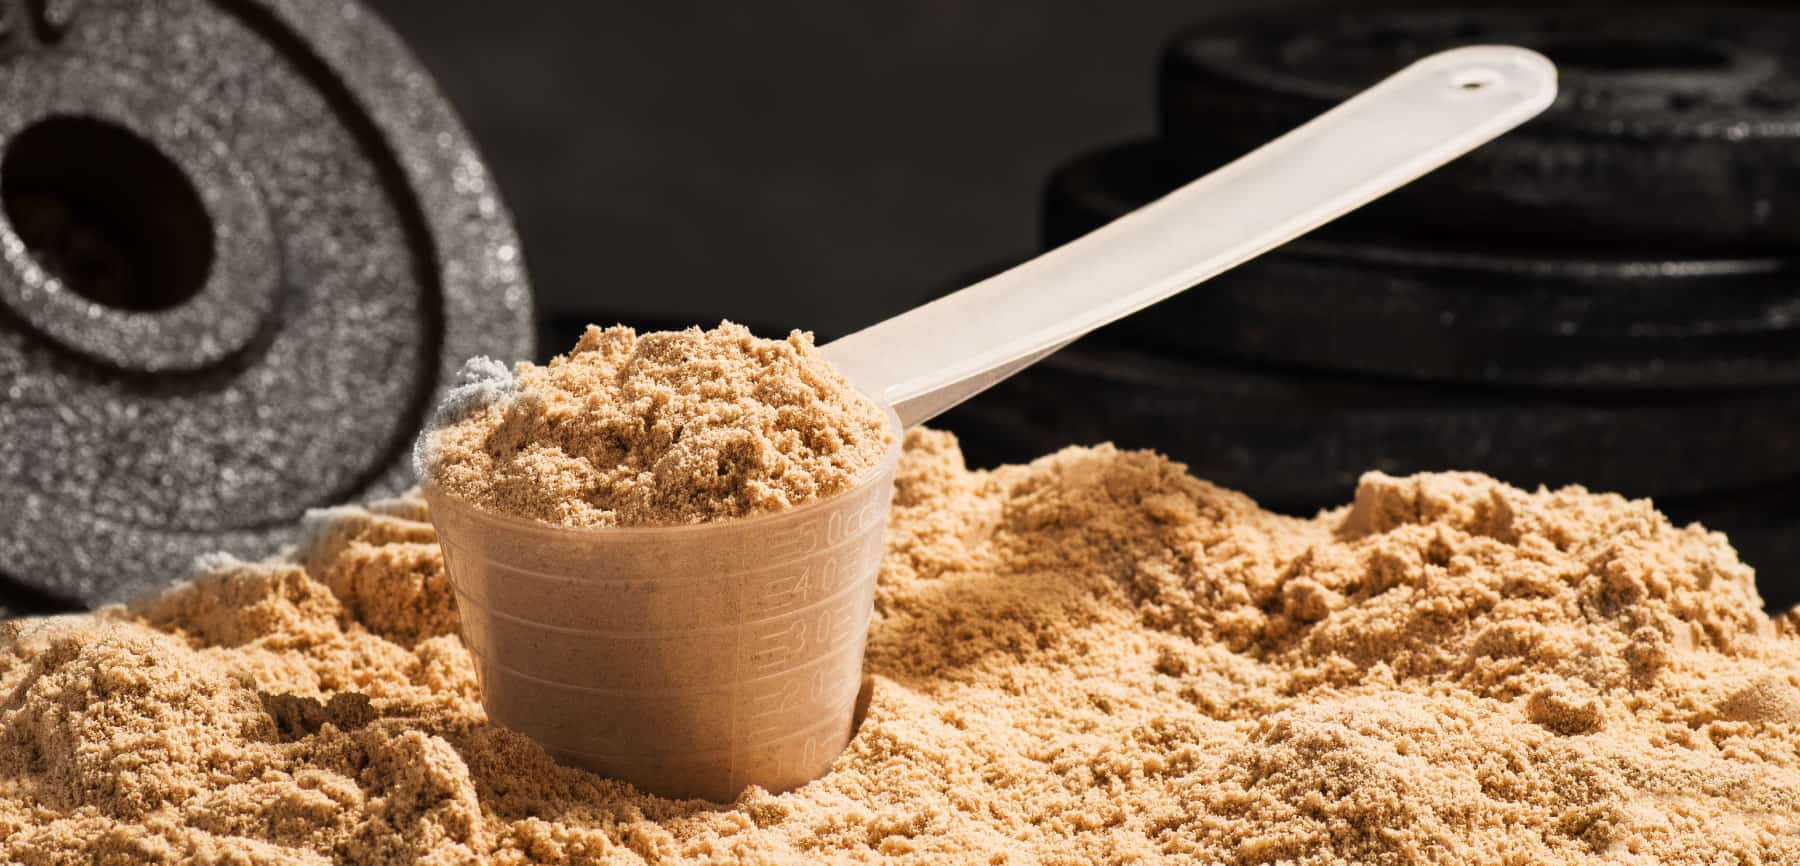 The 13 Best Protein Powders: Whey, Casein, Vegan, and More